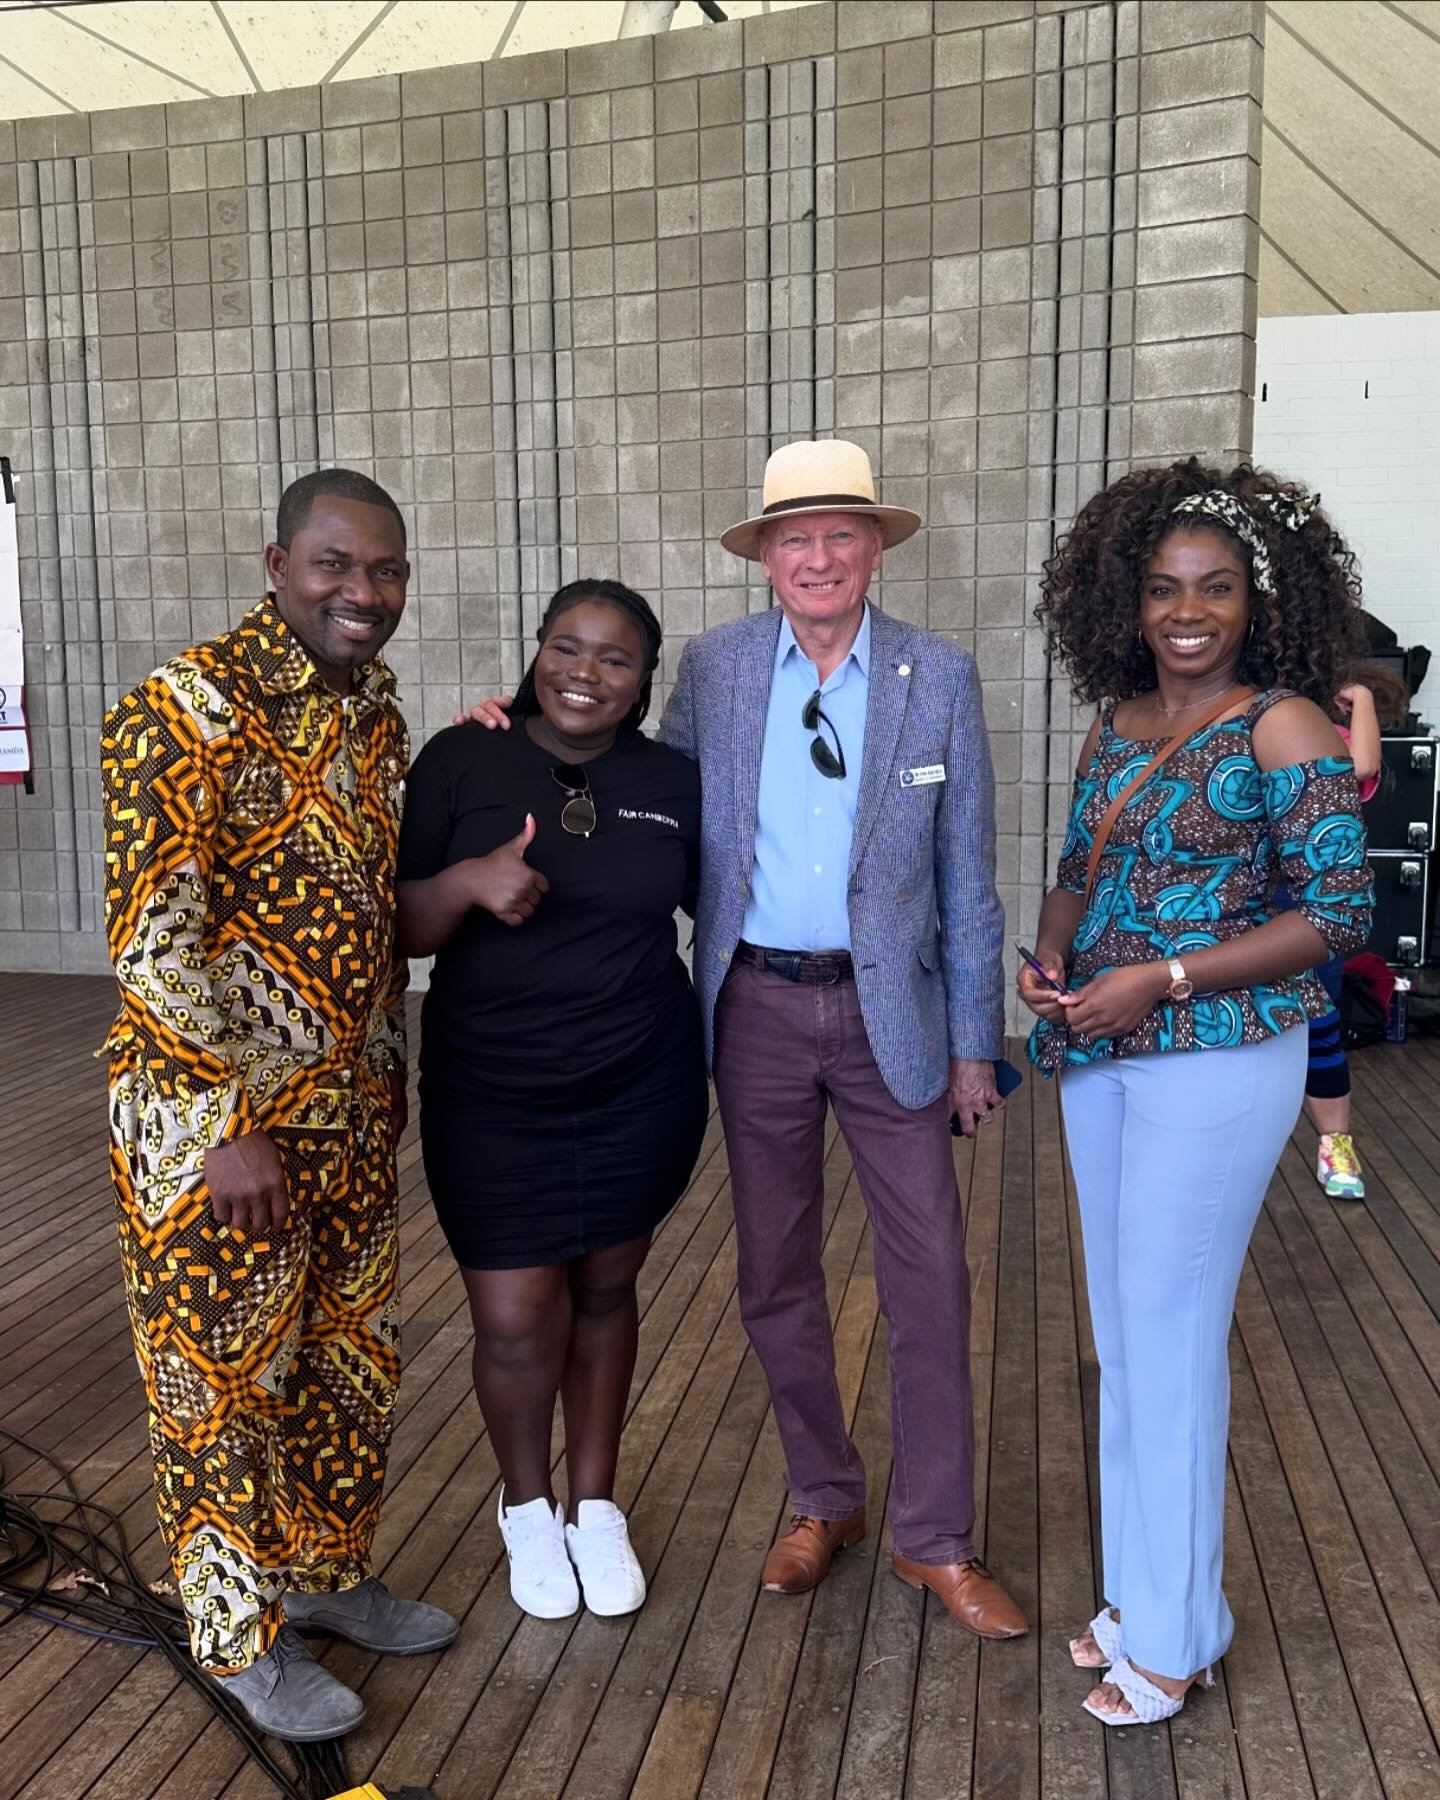 Another terrific Africa Festival in the Park last Saturday at Stage 88 included African-themed food, dances, musical performances, national dress and community stalls. 

It was great to attend and say a few words of encouragement as Shadow Minister f